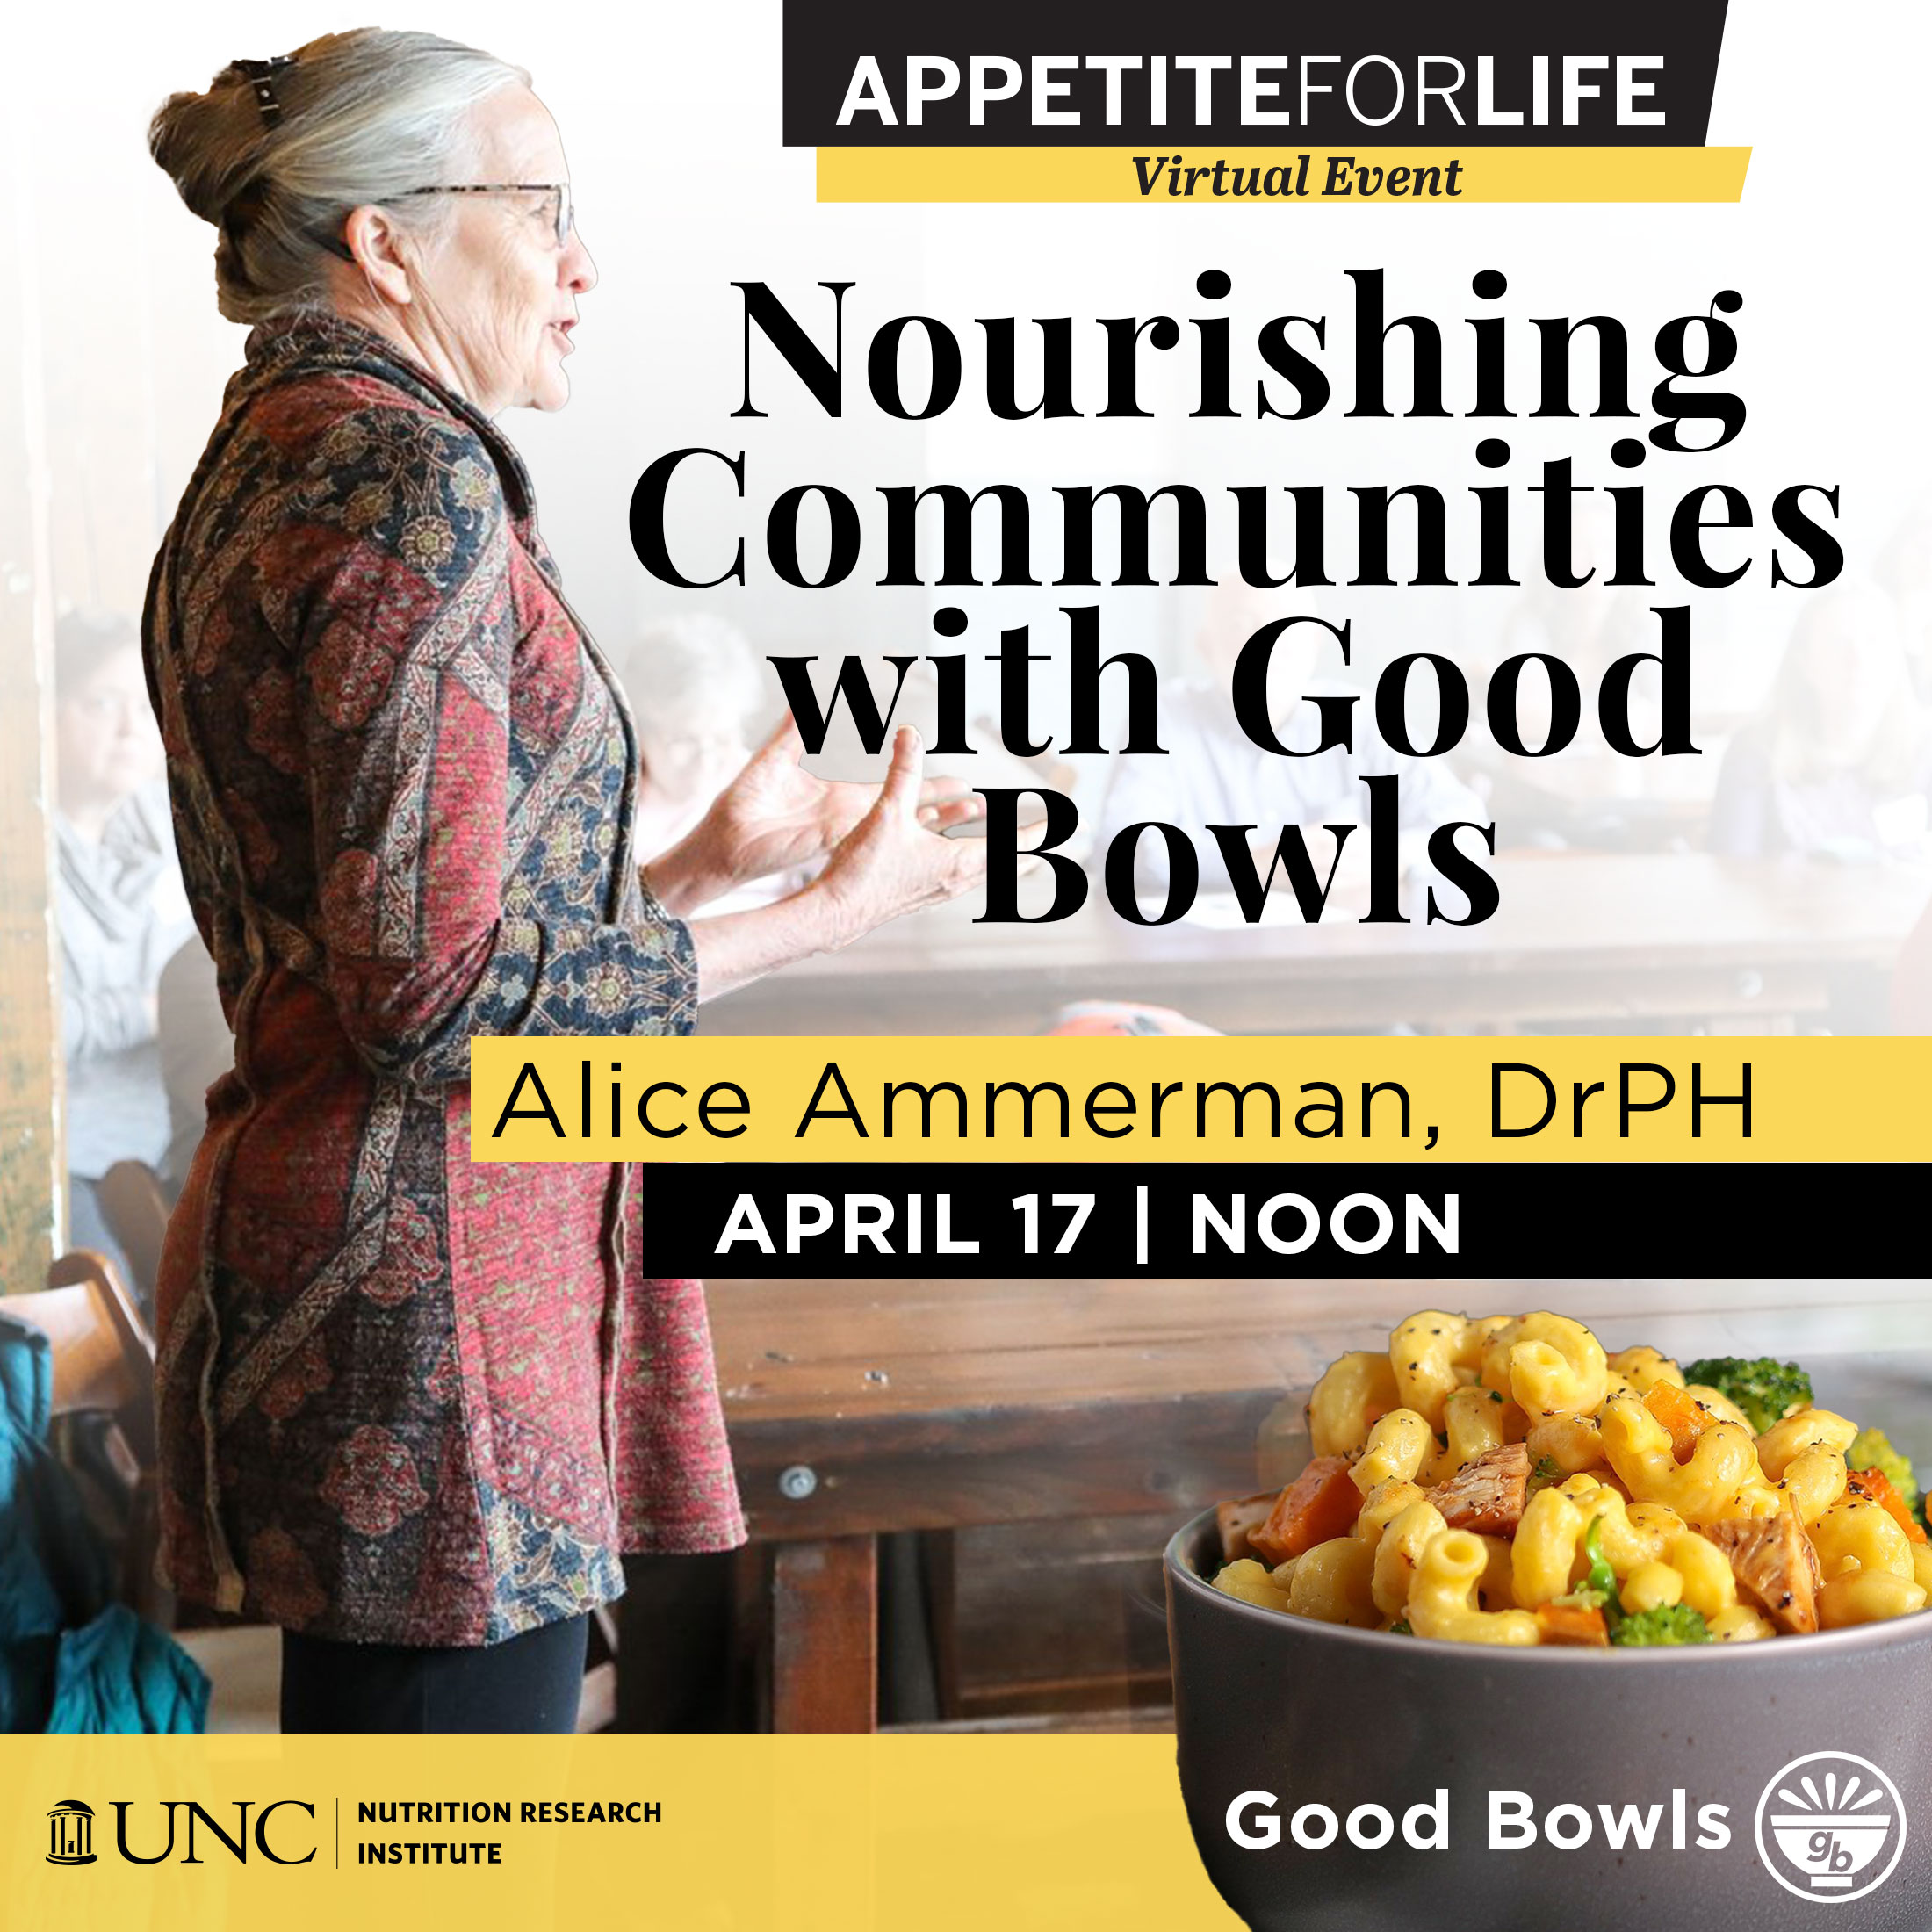 Appetite for Life: Nourishing Communities with Good Bowls